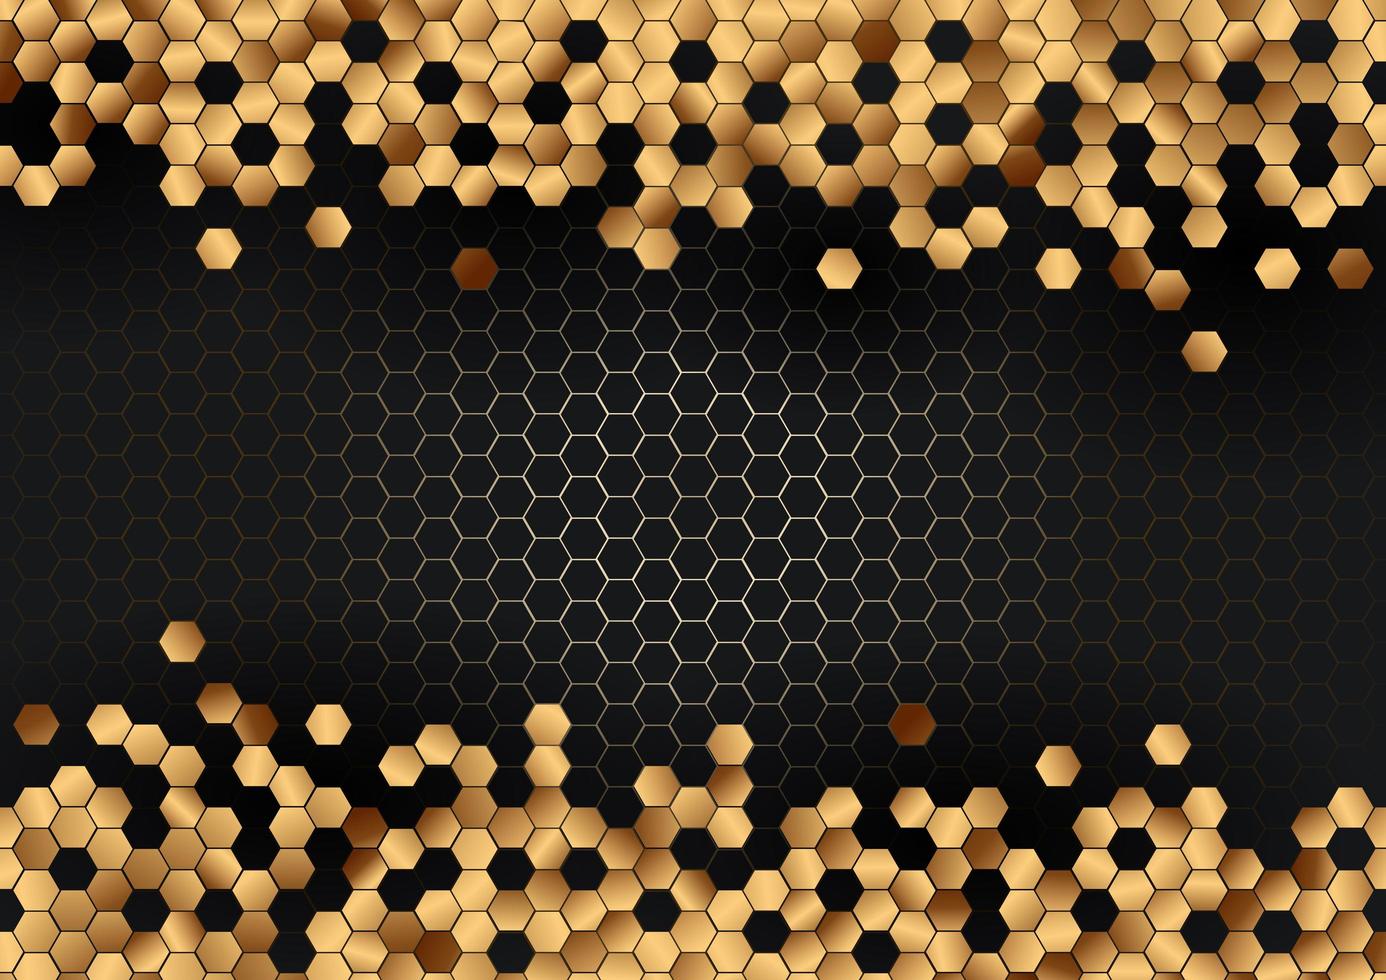 Abstract gold hexagons pattern on black hexagonal background  vector